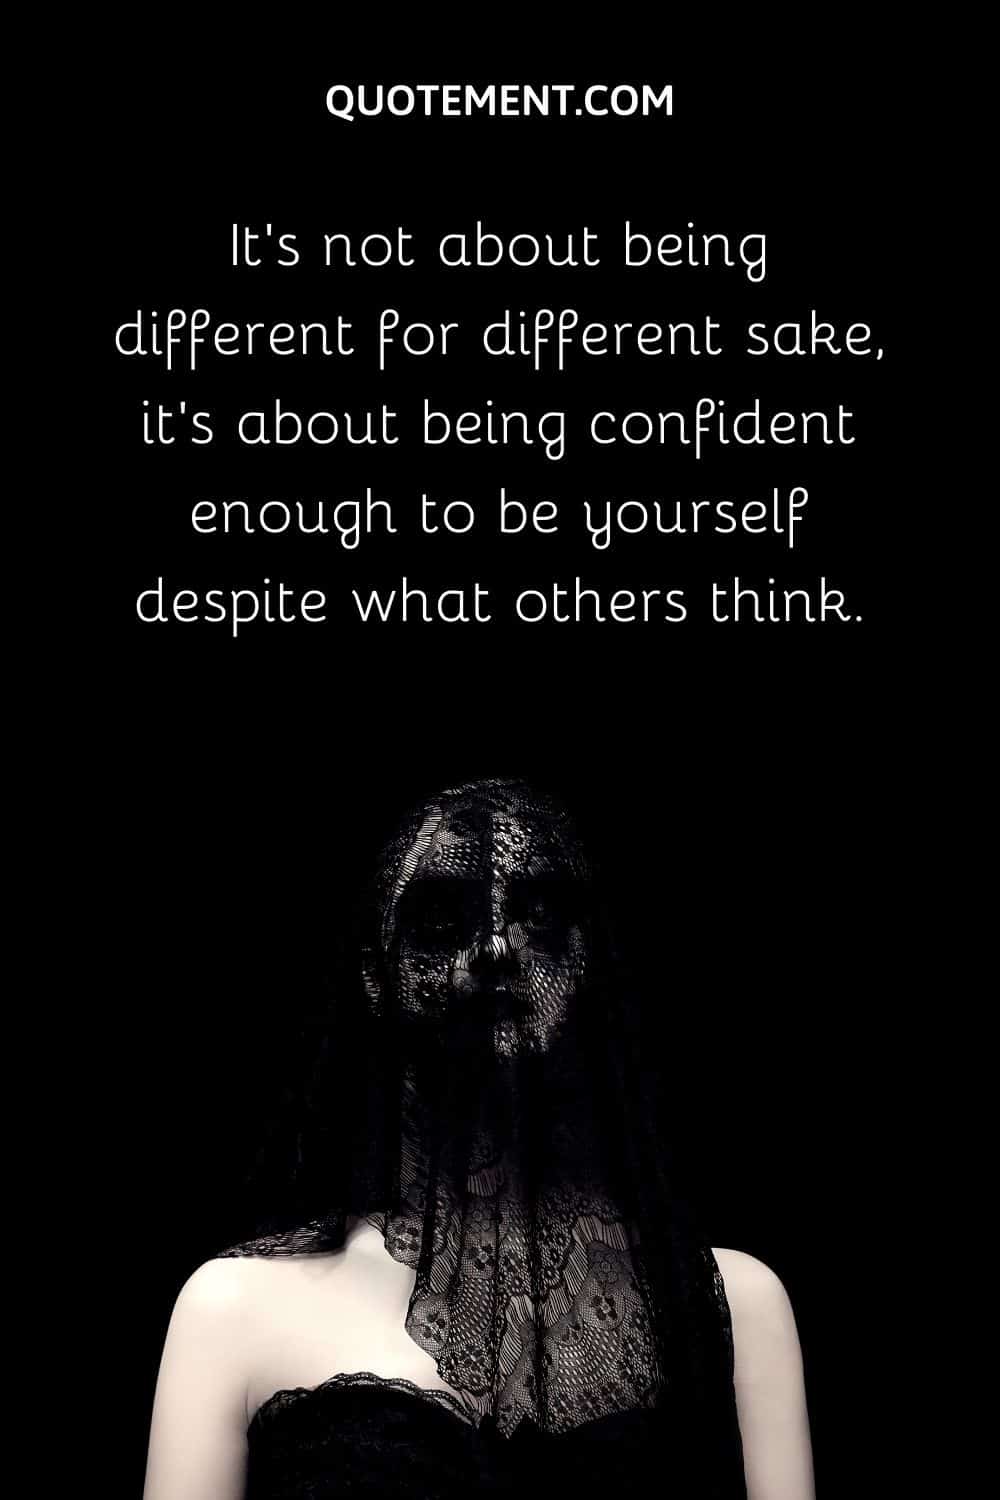 It’s not about being different for different sake,